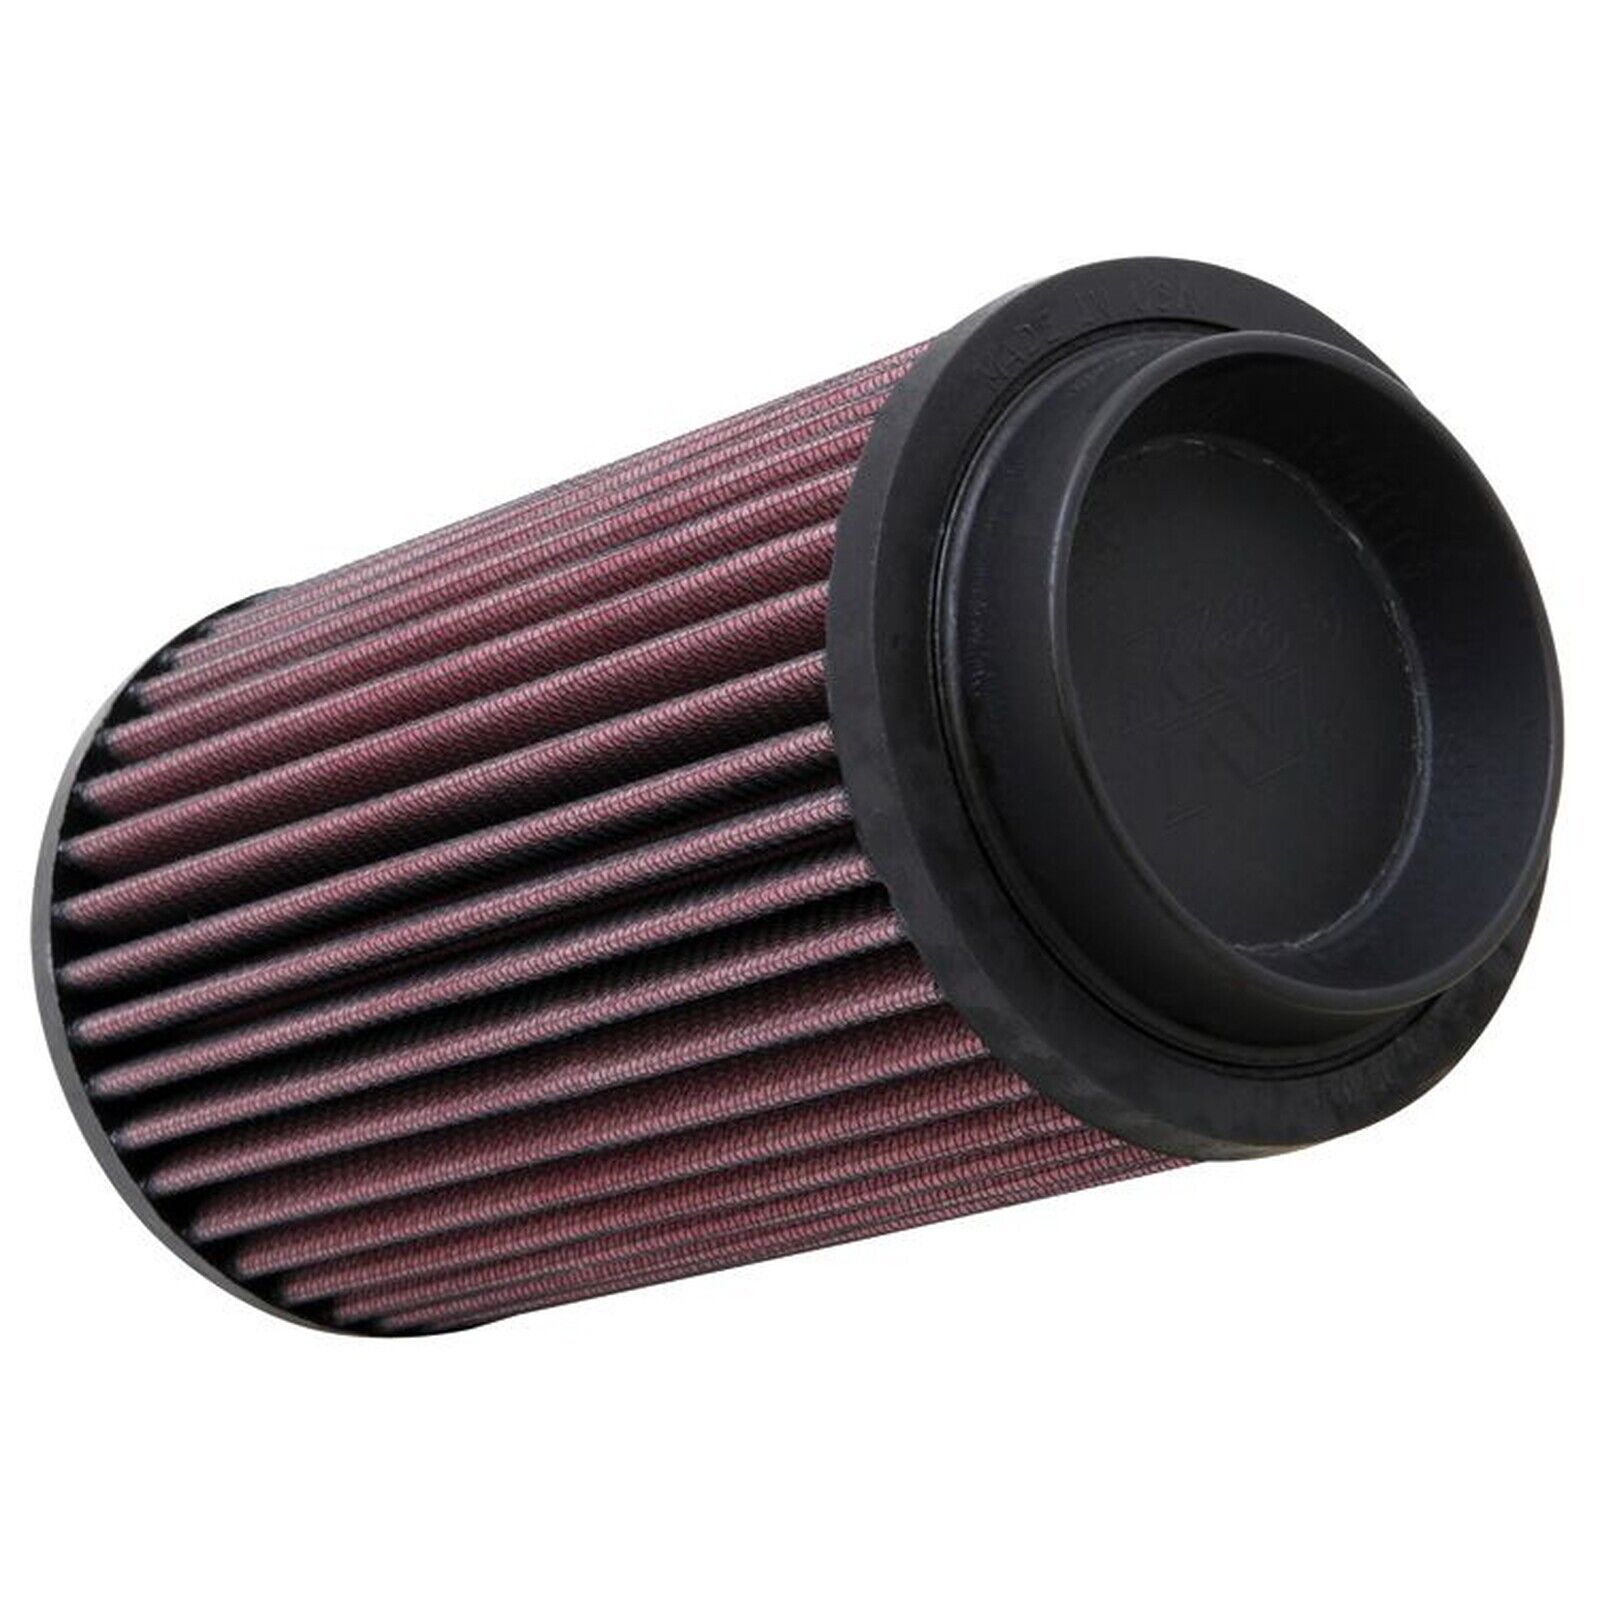 K&N Replacement Air Filter PL-5509 - Reusable - Low Maintenance - Easy Install